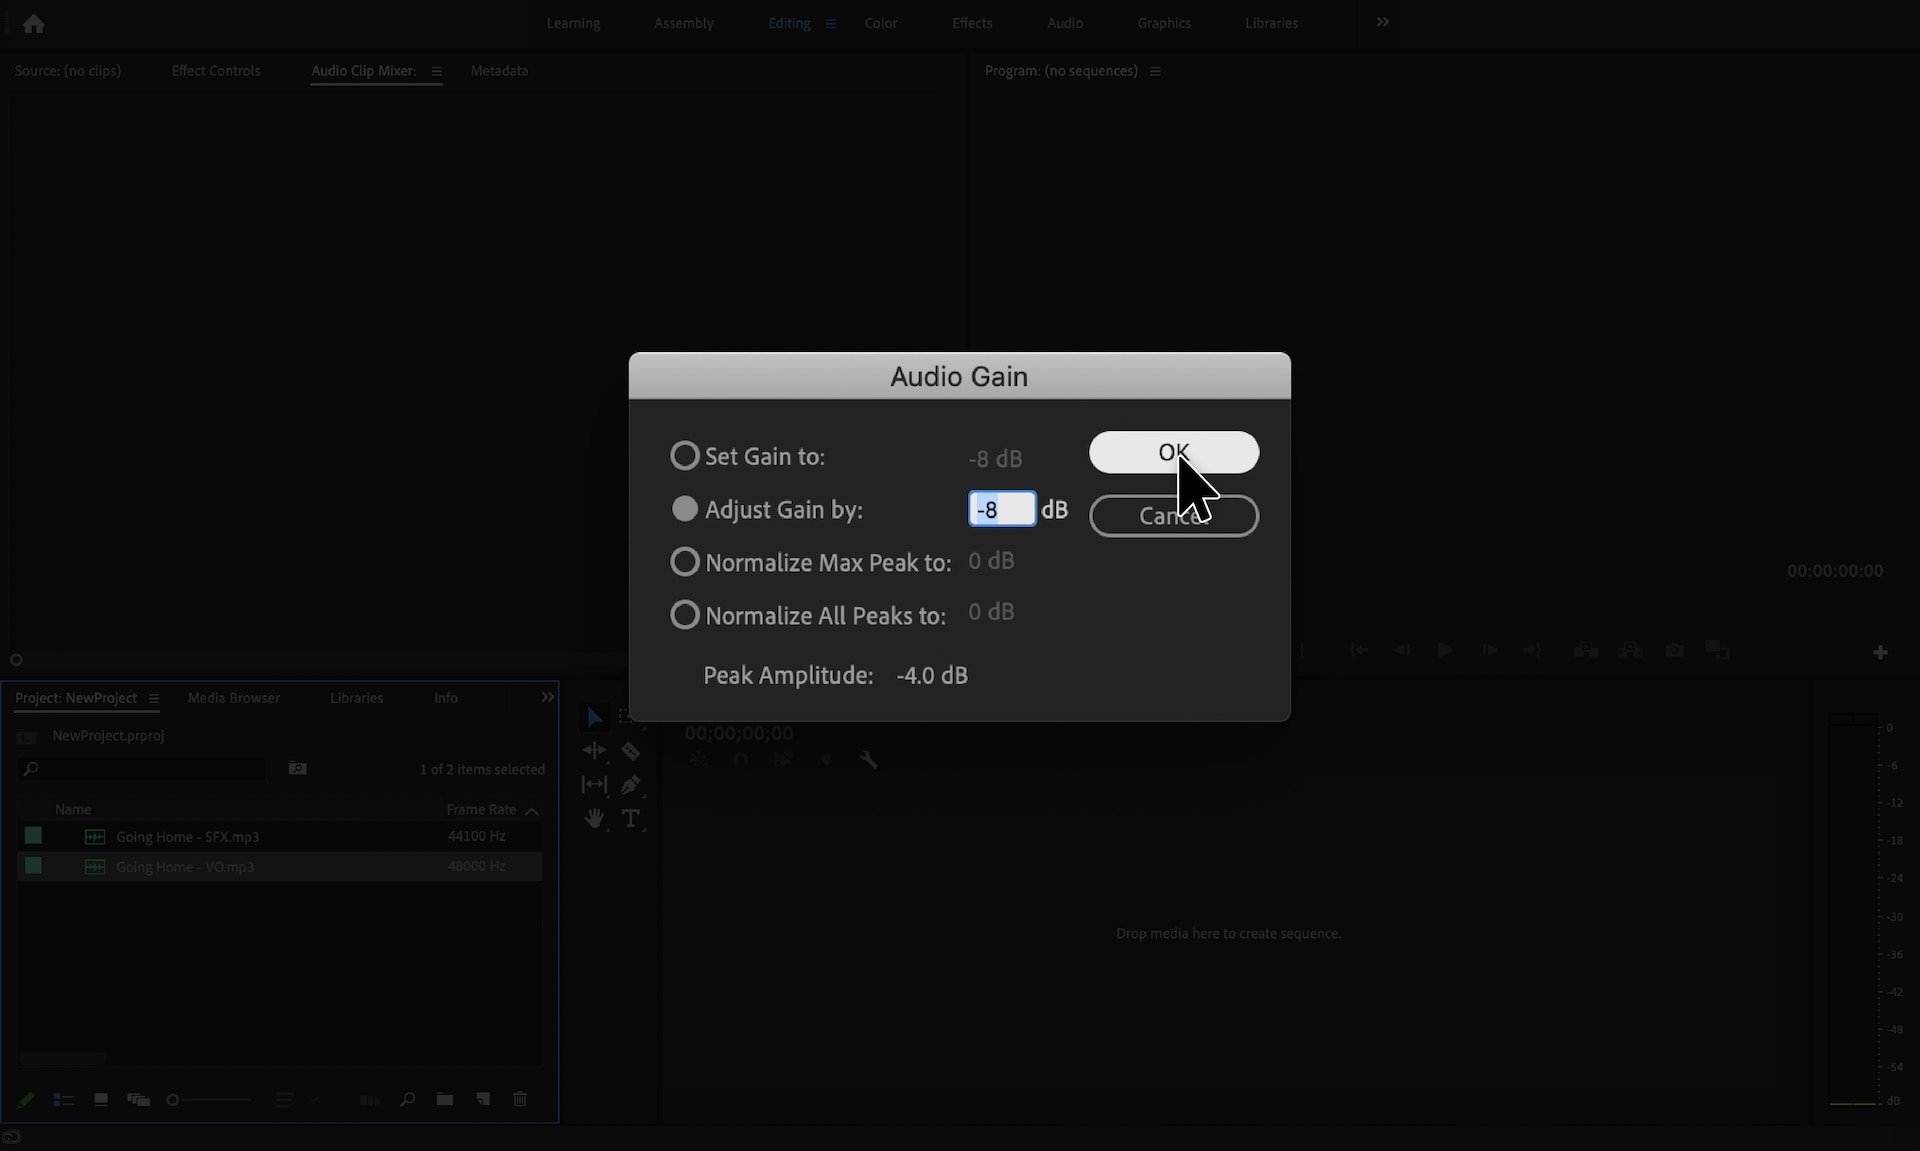 Adobe Premiere Pro with Audio Gain box opened with desired decibel level.